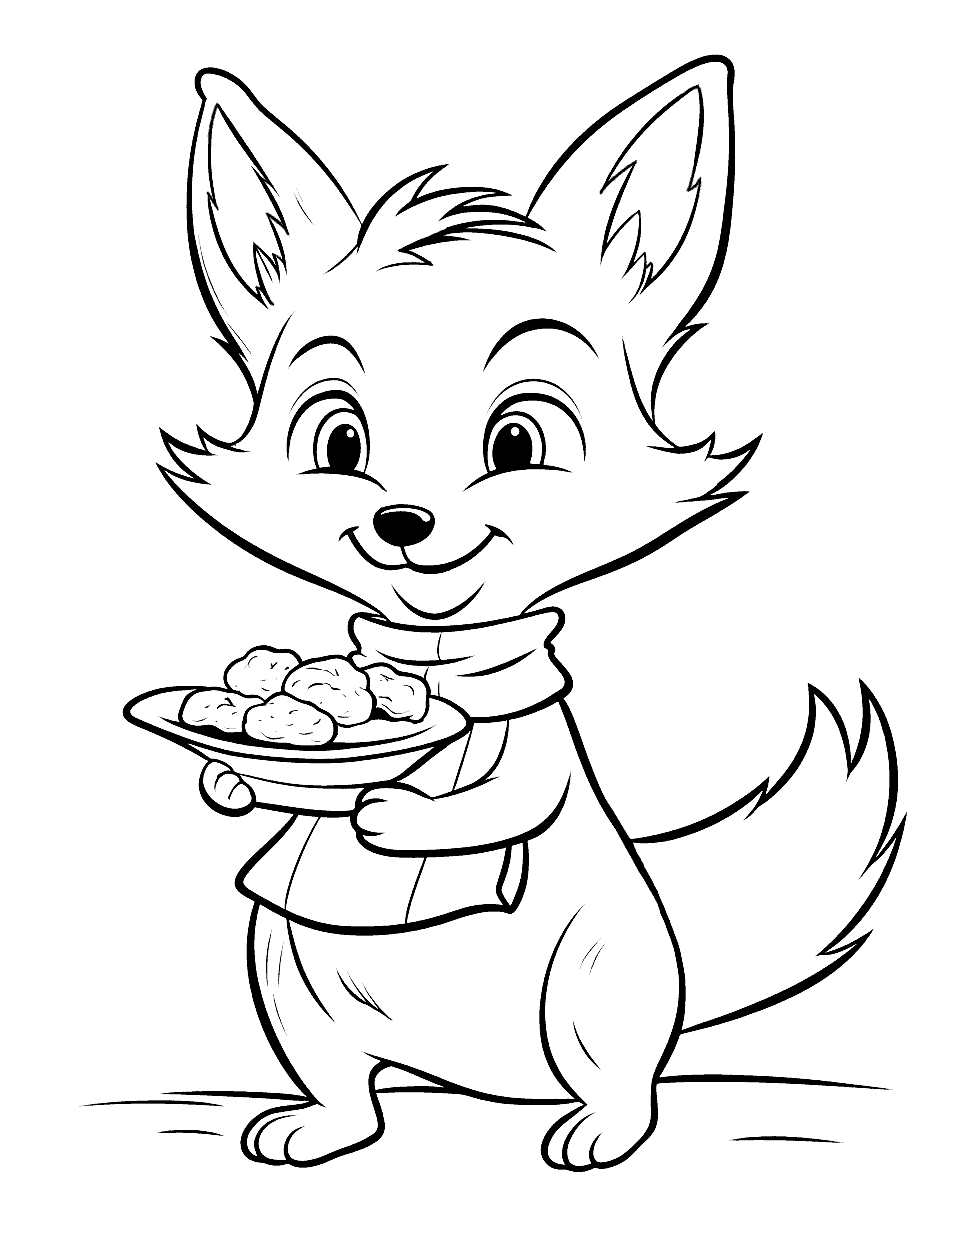 Fox Chef's Special Coloring Page - A fox chef presenting its delectable dish with a proud grin.